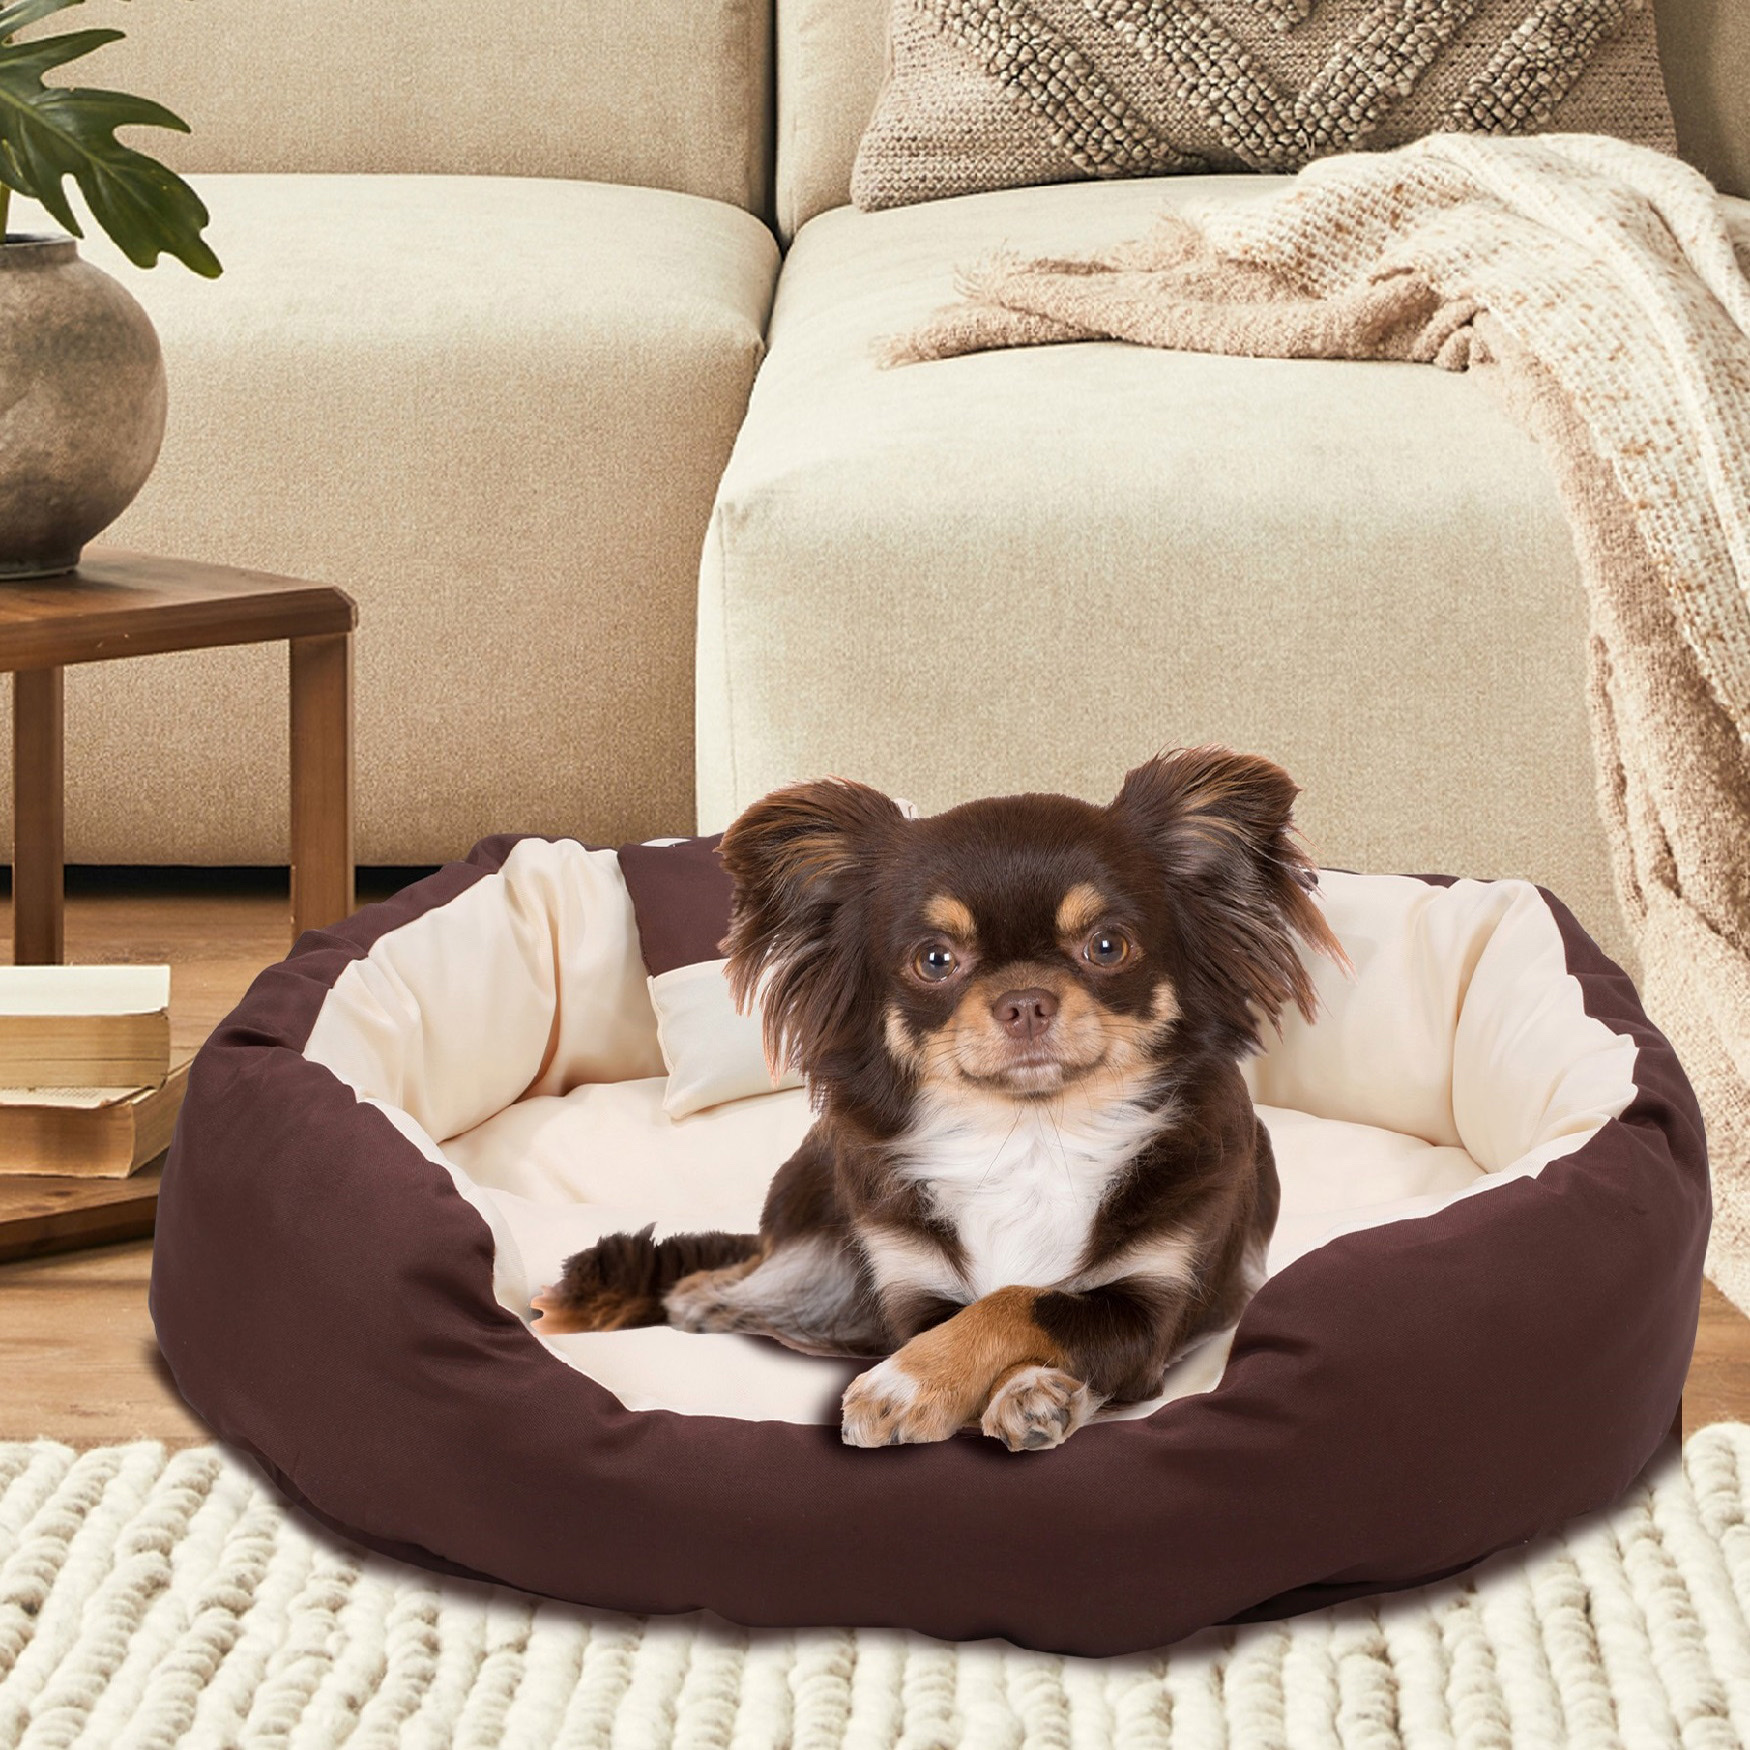 Happycare Tex Durable Bolster sleeper Oval Pet bed with removable reversible insert cushion and additional two pillow , Medium 26 by 20 inches ,Brown to Beige, BROWN